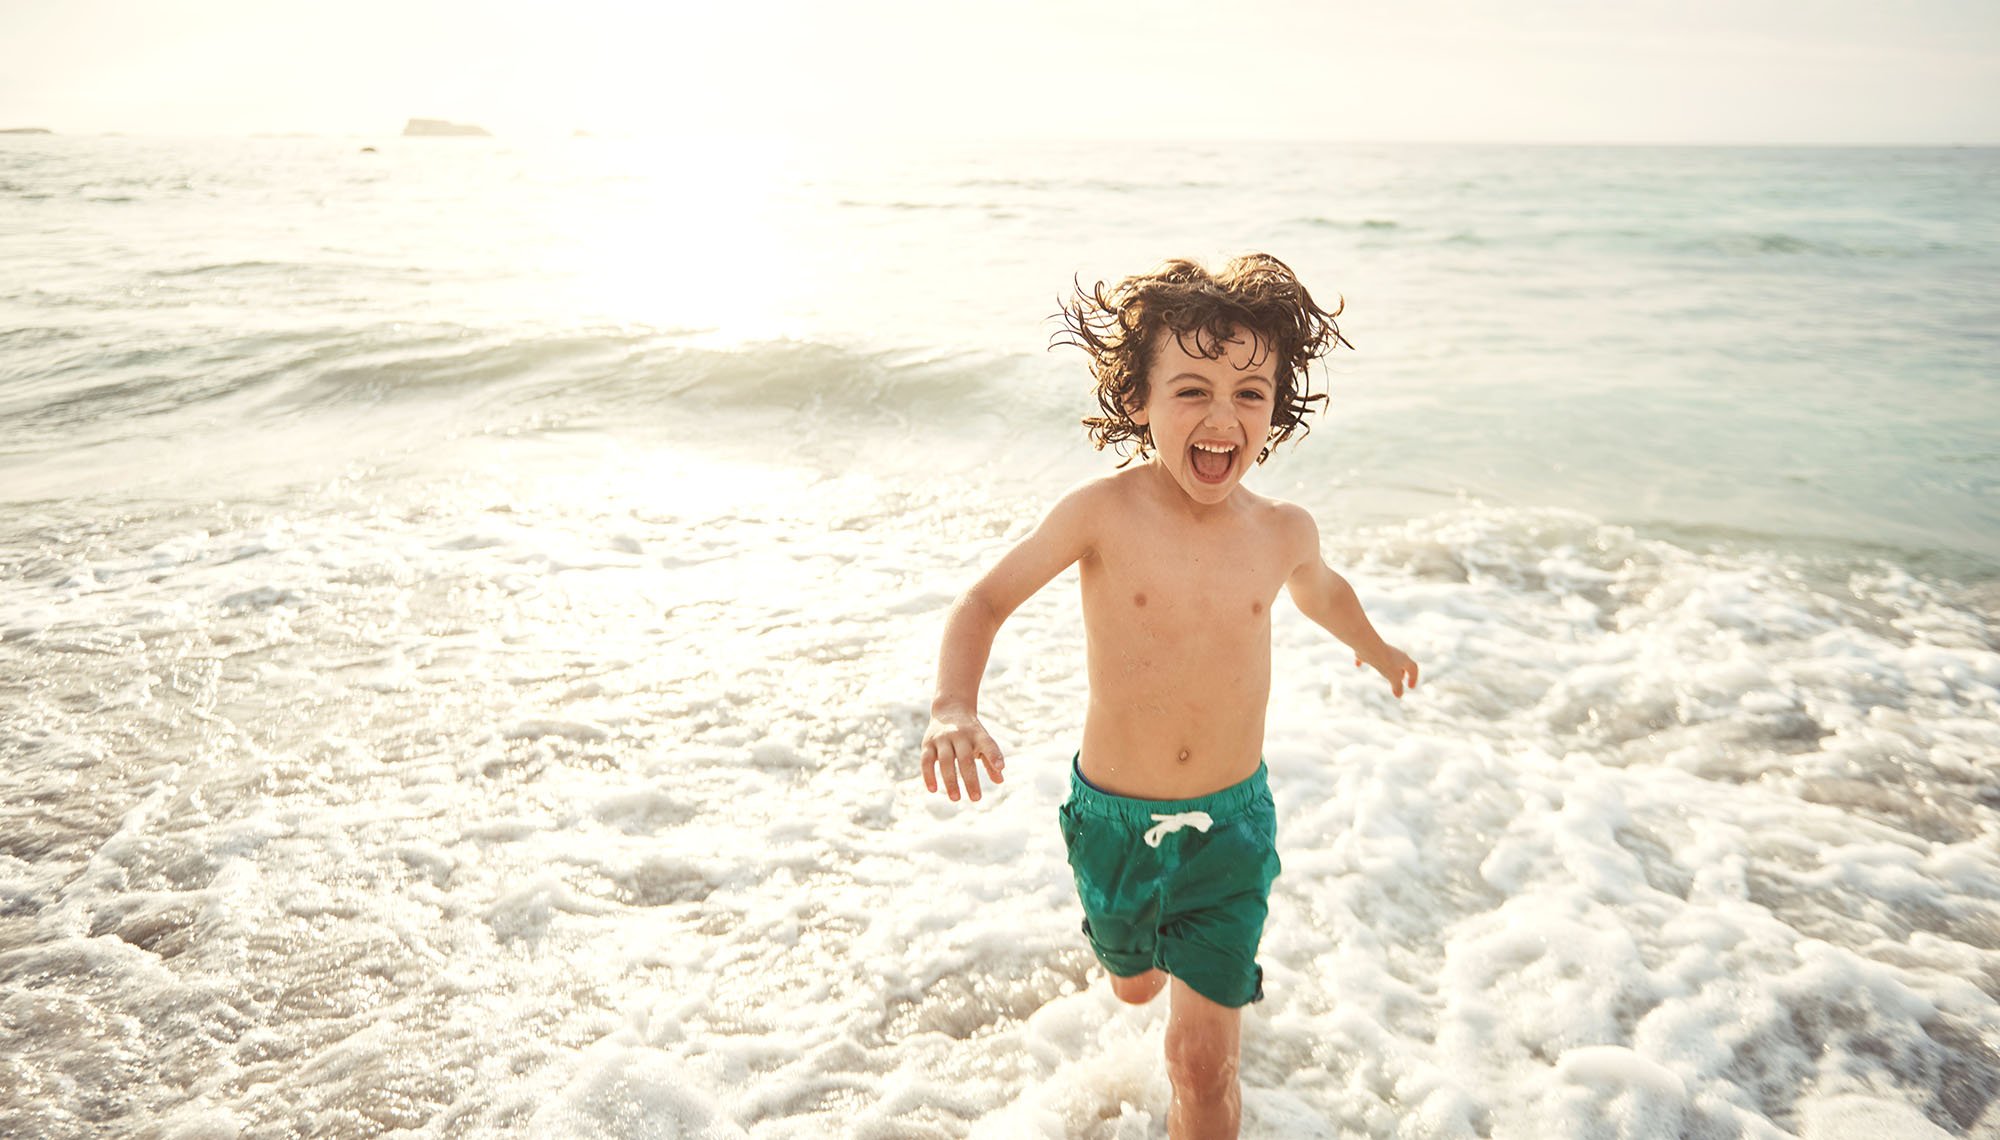 A young boy in green swim trunks laughs and runs through foaming waves on a beach